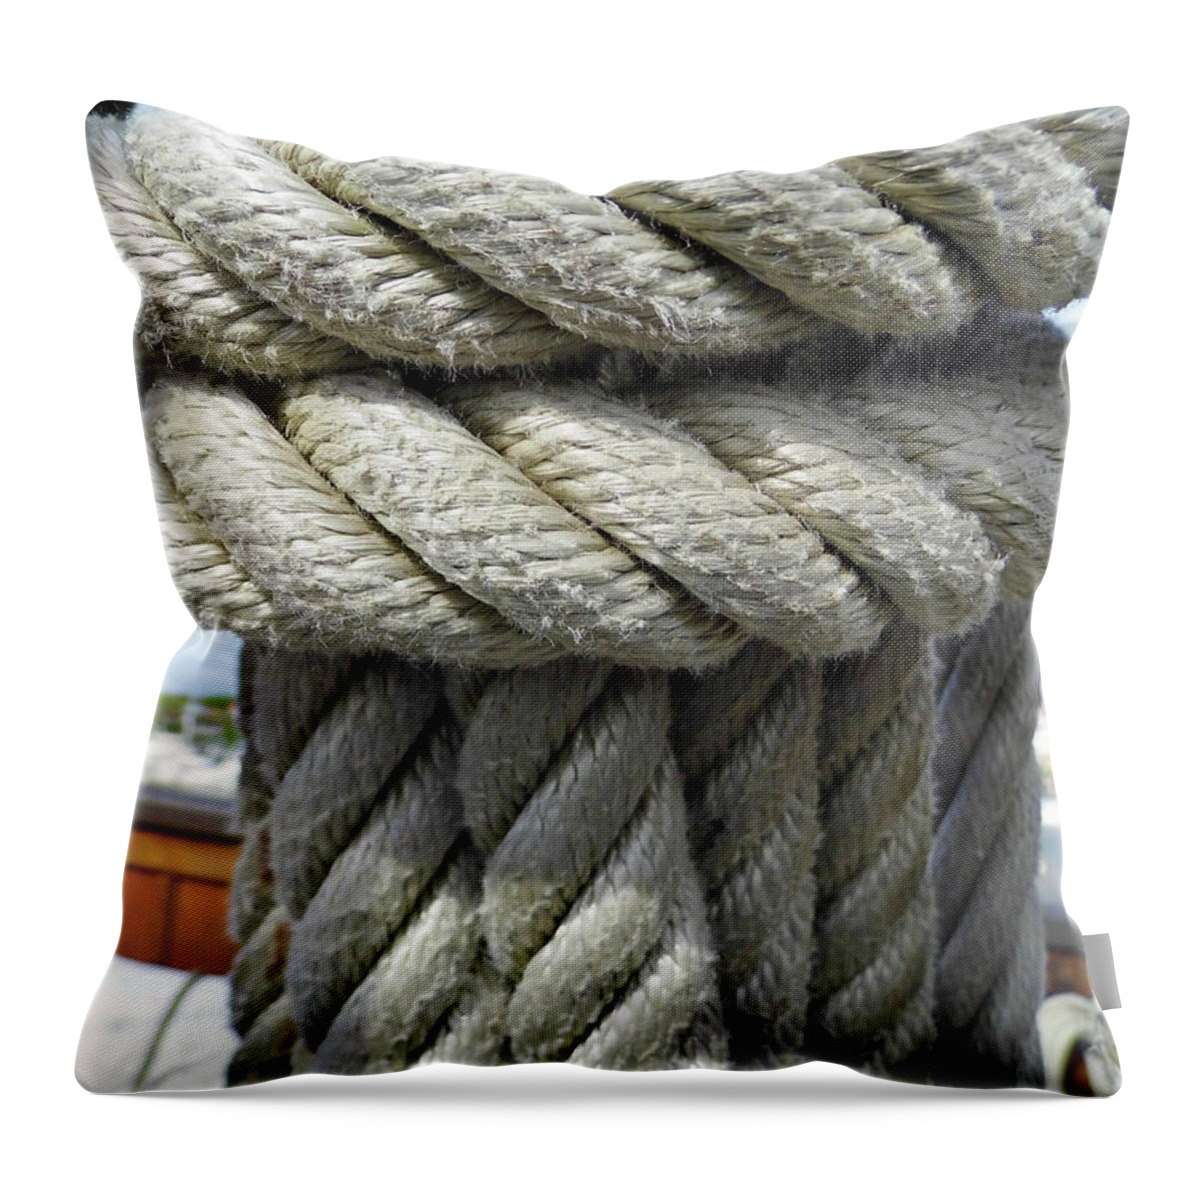 El Galeon Throw Pillow featuring the photograph Wrapped Up Tight by D Hackett